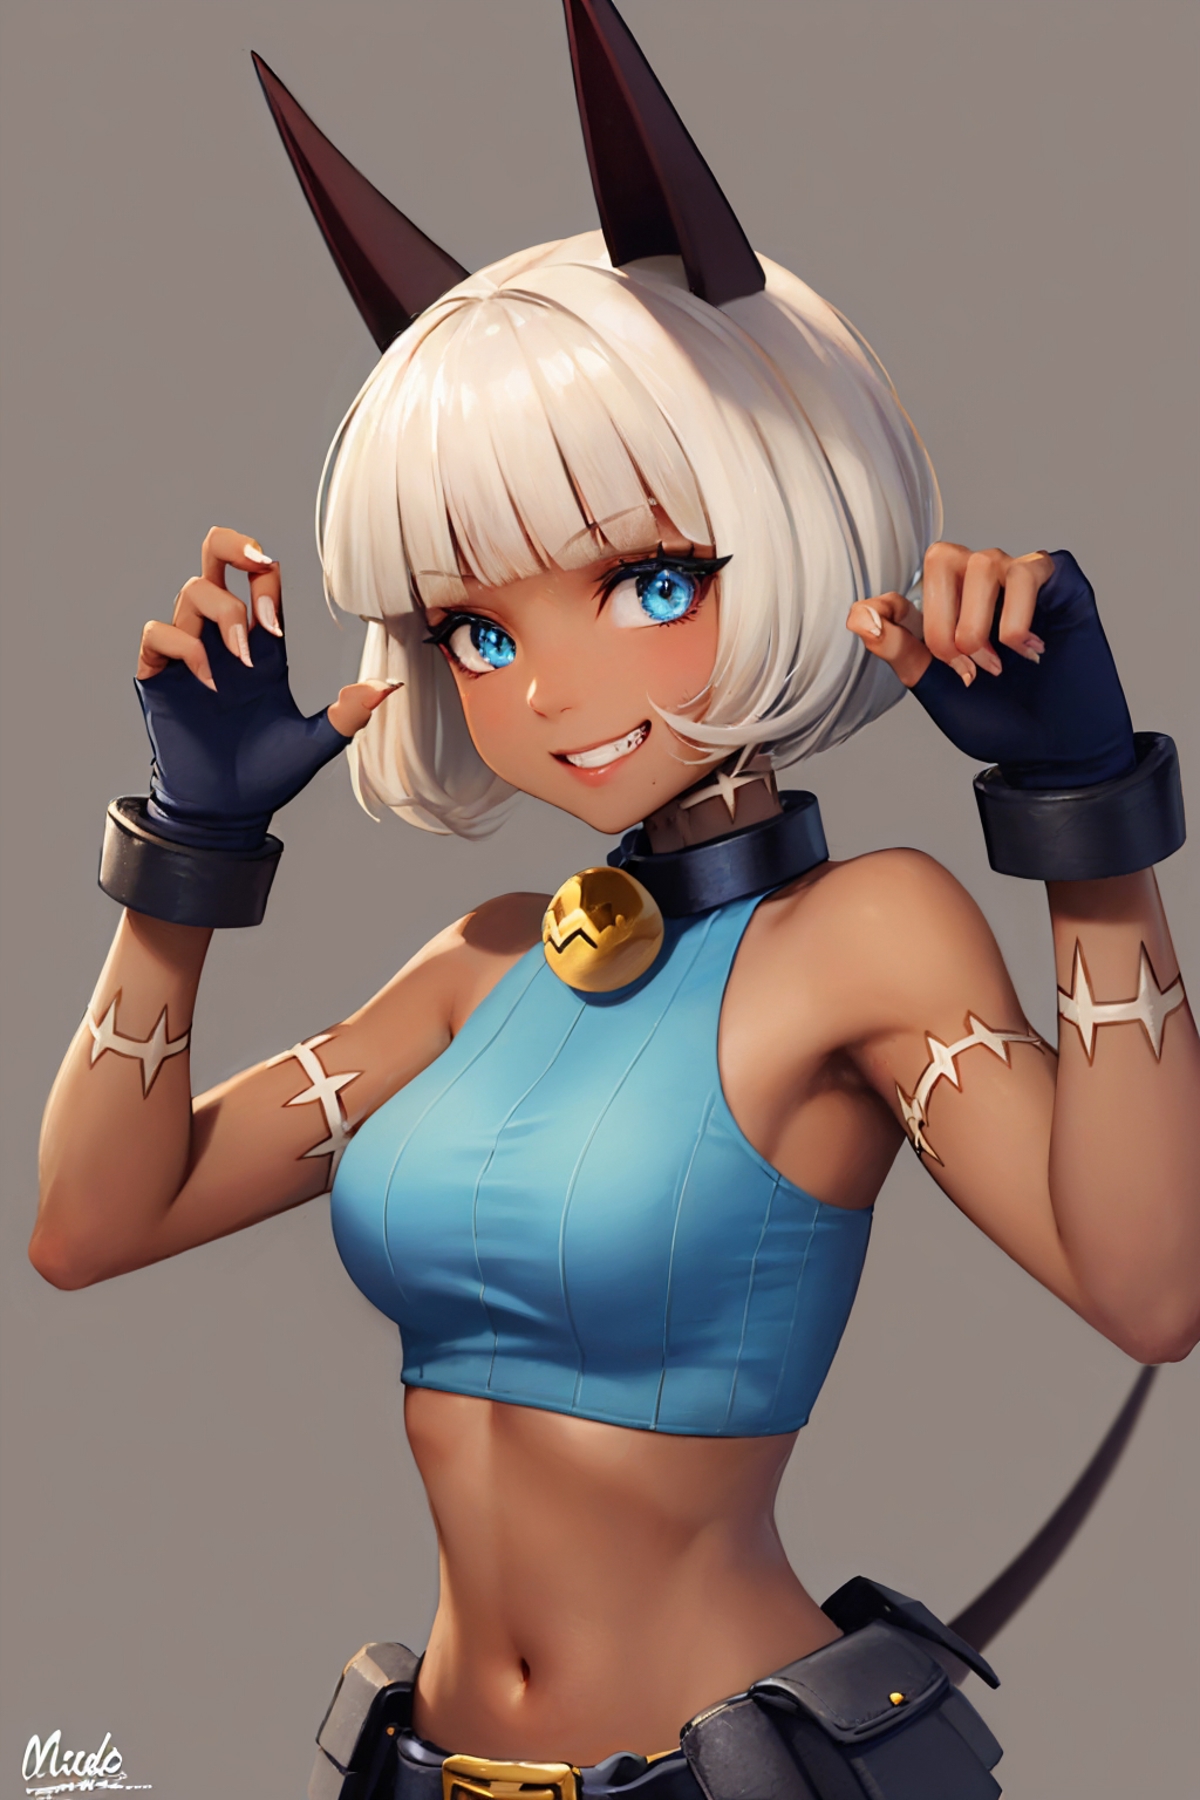 Ms. Fortune | Skullgirls image by justTNP